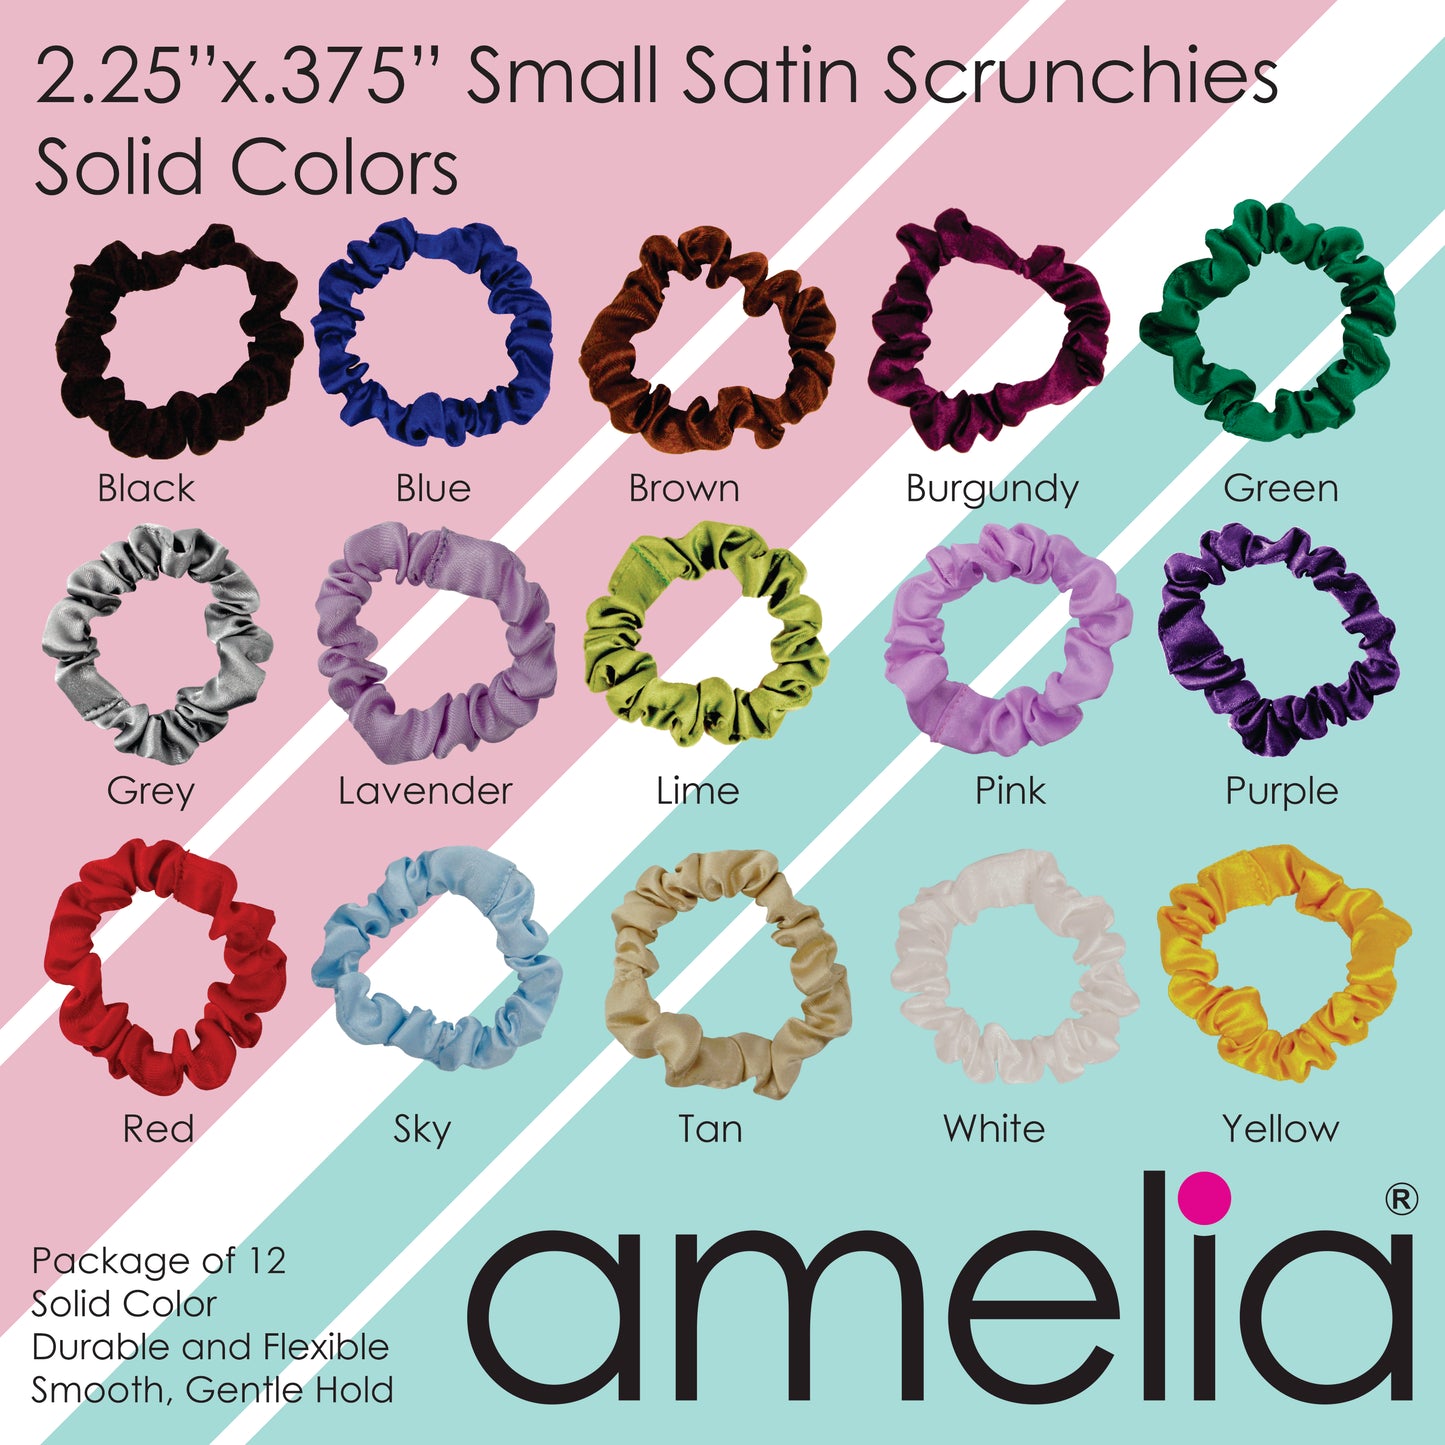 Amelia Beauty, Lime Satin Scrunchies, 2.25in Diameter, Gentle on Hair, Strong Hold, No Snag, No Dents or Creases. 12 Pack